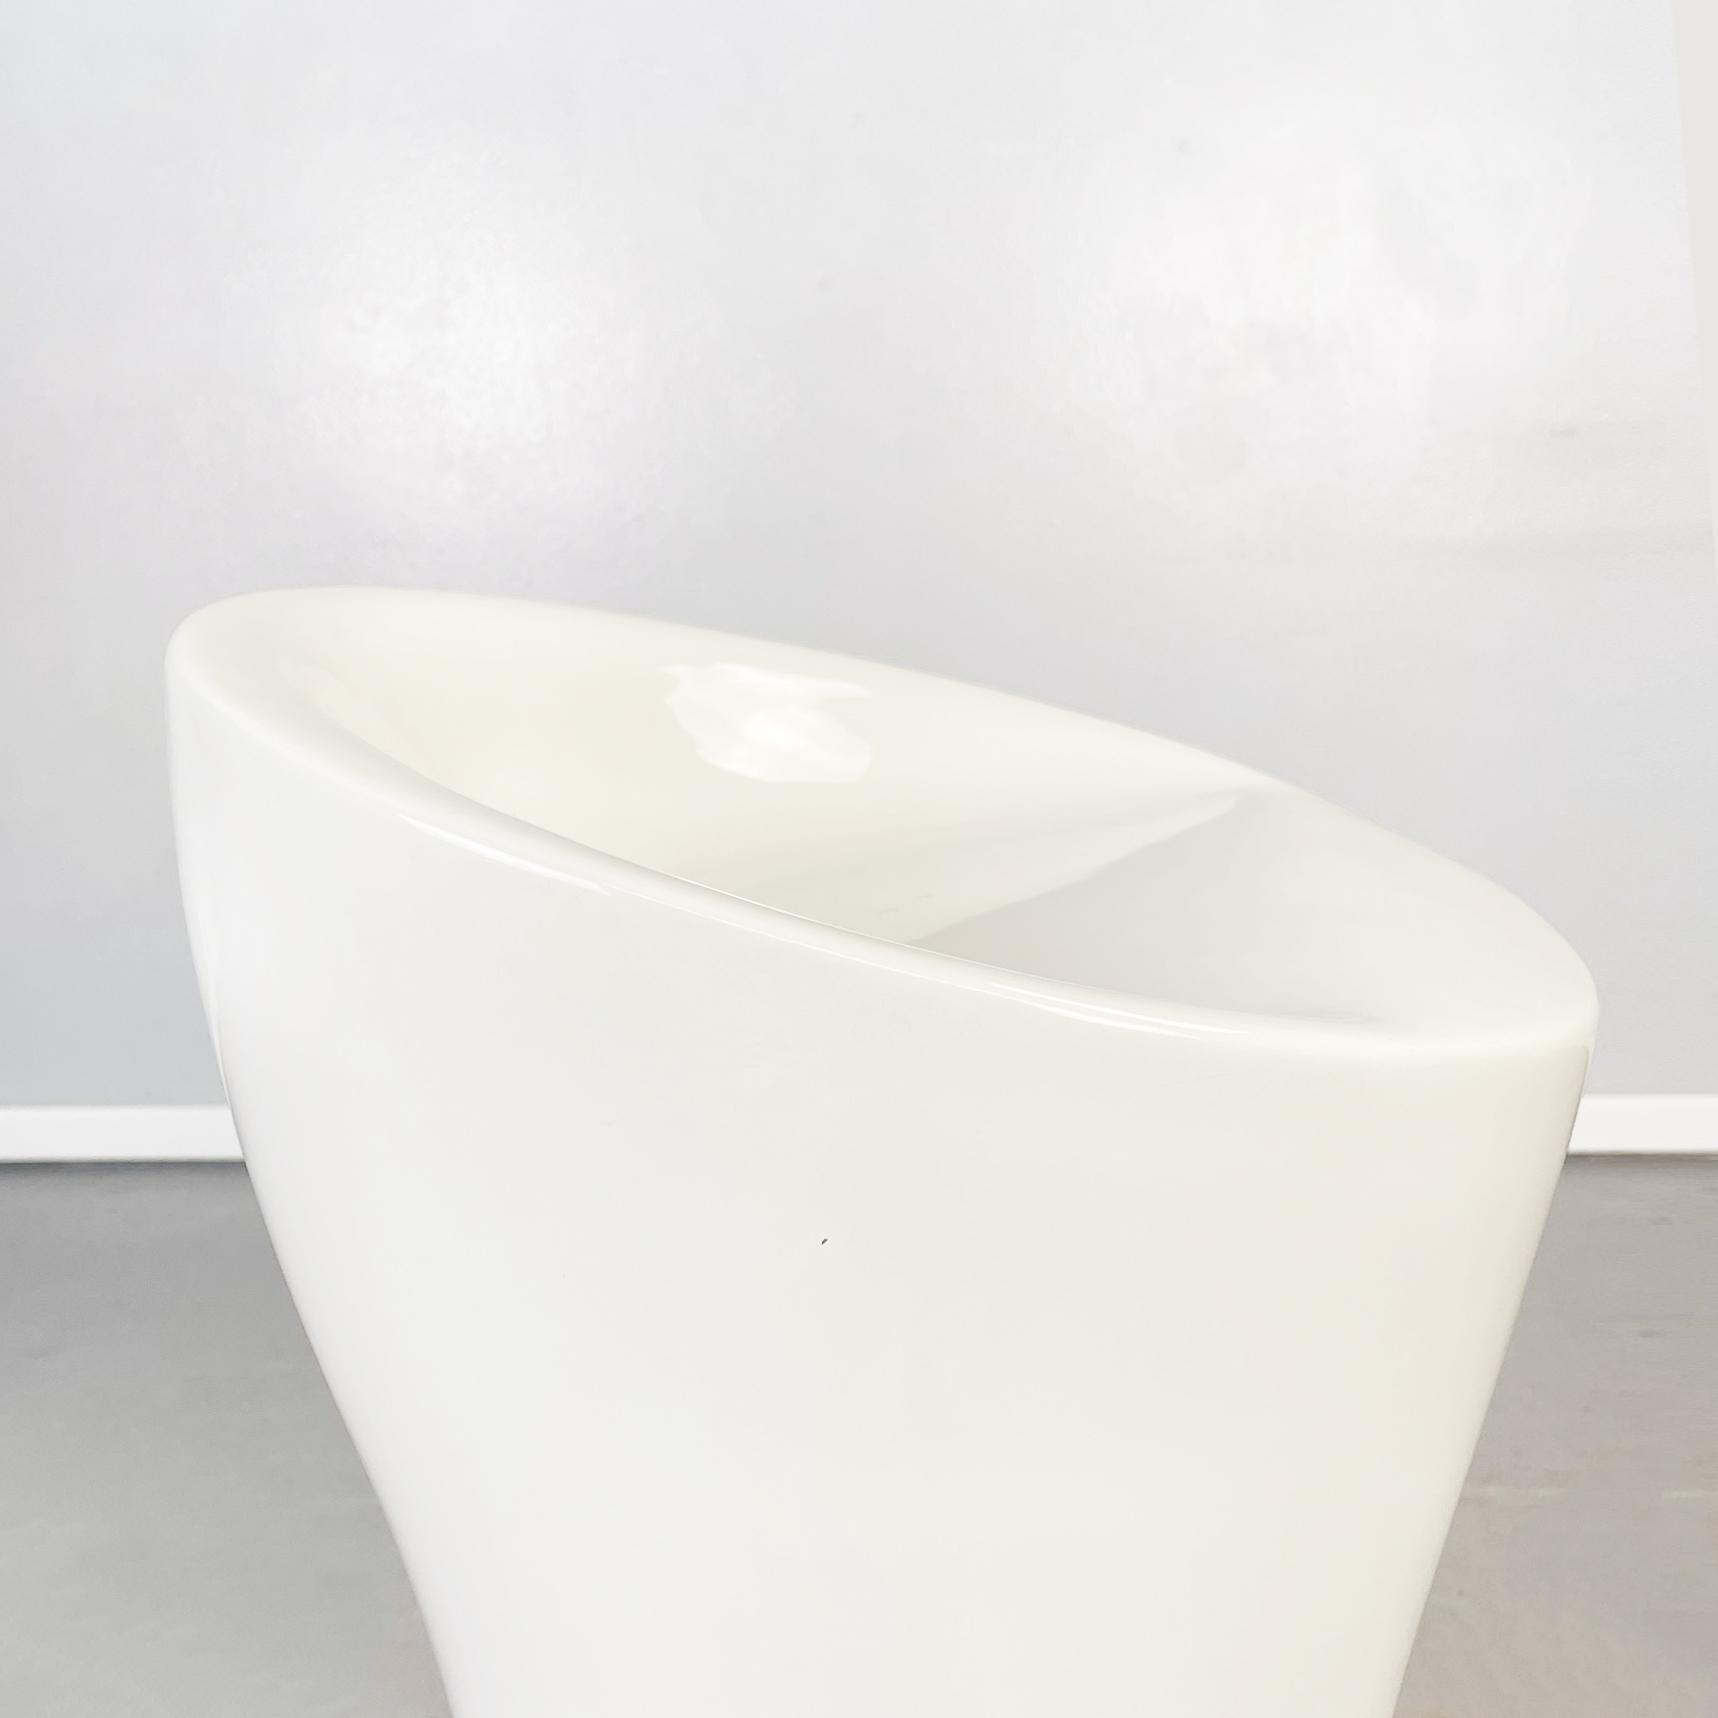 Italian Space Age Modern Stool with Footrest in White Plastic, 2000s For Sale 4